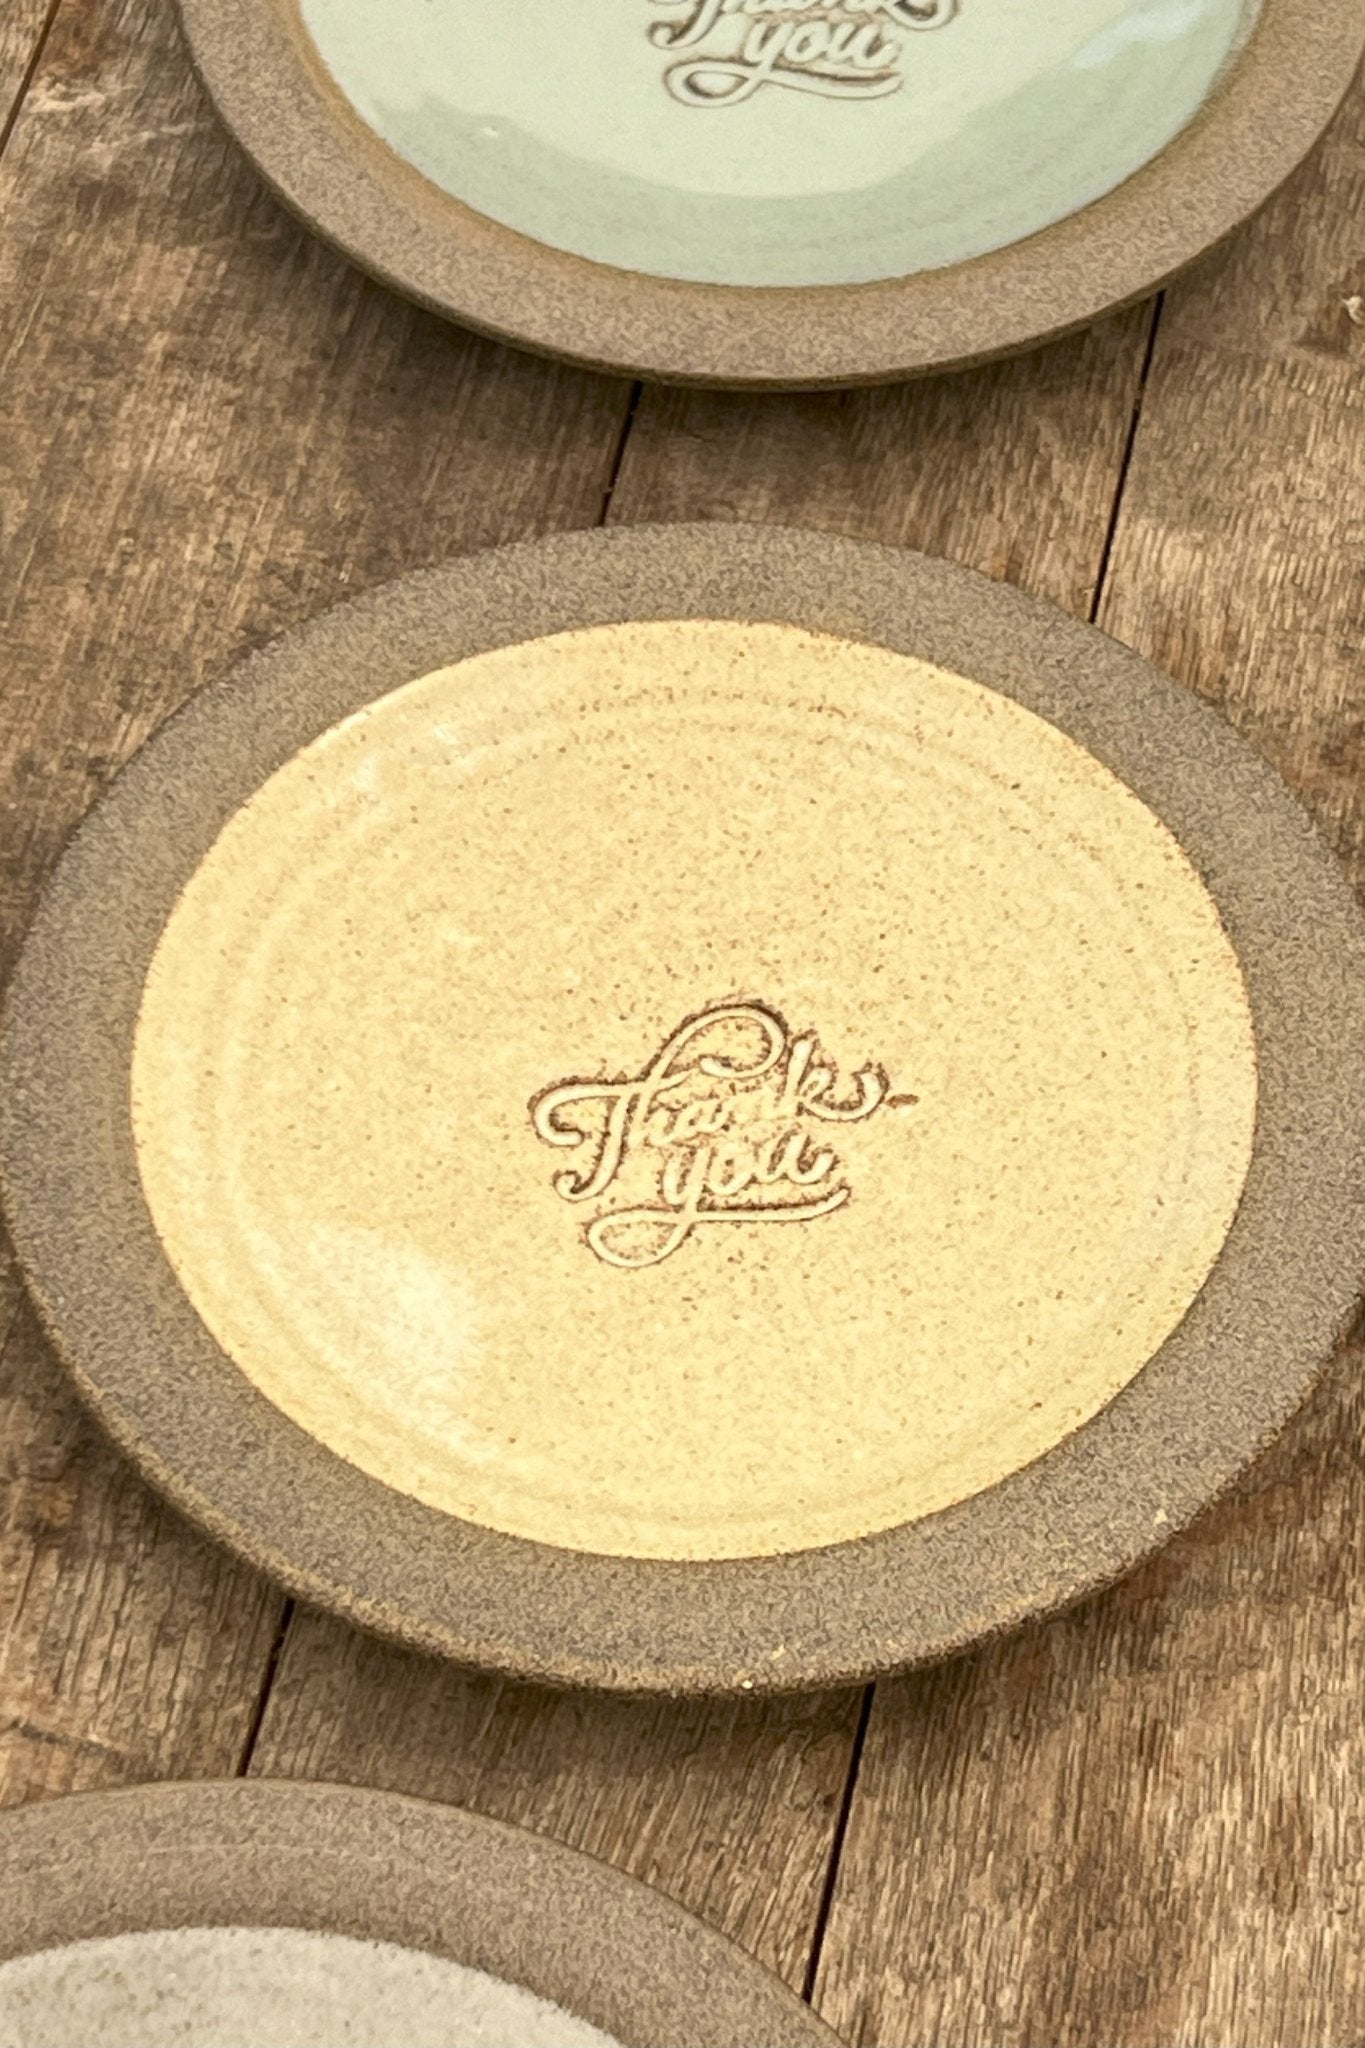 Pottery Trinket Dish - "Thank You" Engraved - Mad About Pottery- plates